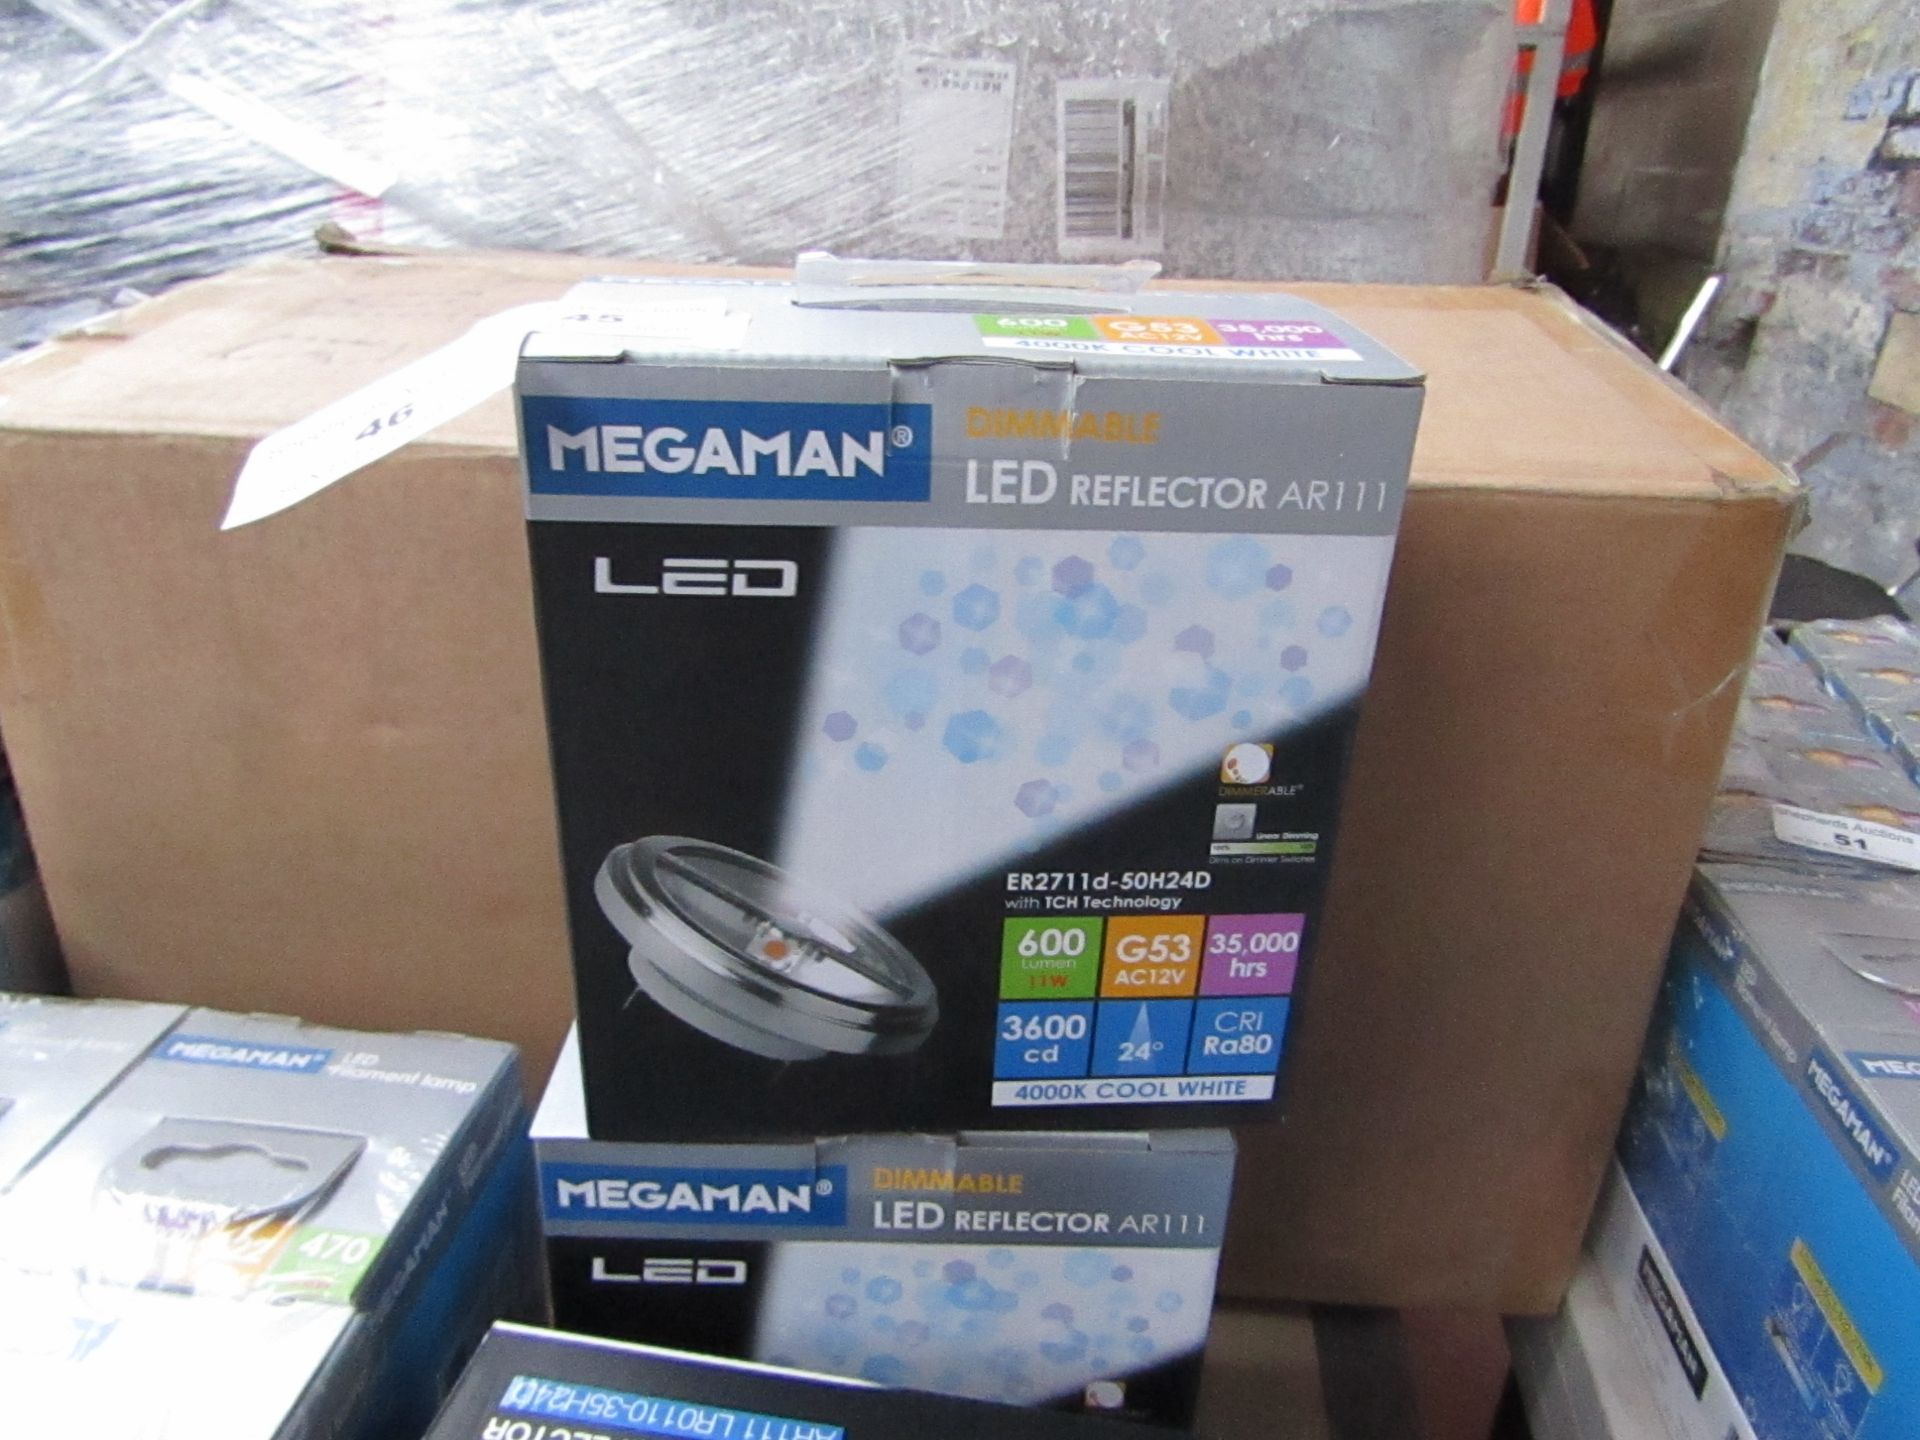 1x Mega Man LED Dimmable Reflector lamp, New and Boxed. 35,000 Hrs / G53 / 600 Lumens